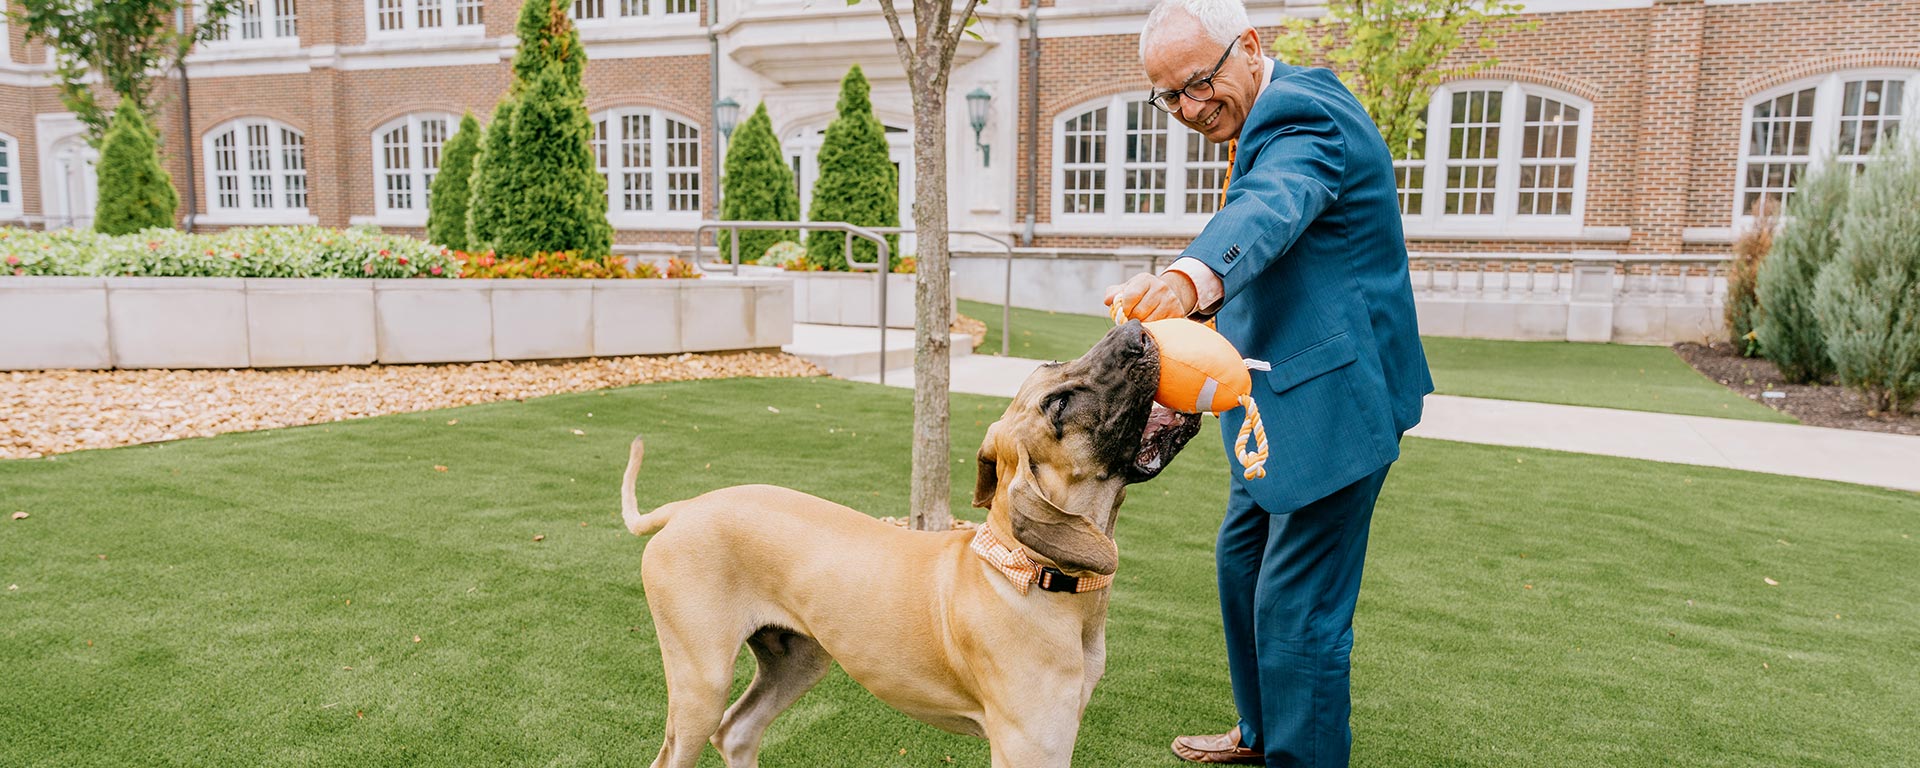 UTHSC Chancellor Peter Buckley plays with his dog, Finn Mac Cool, on the campus' quad.